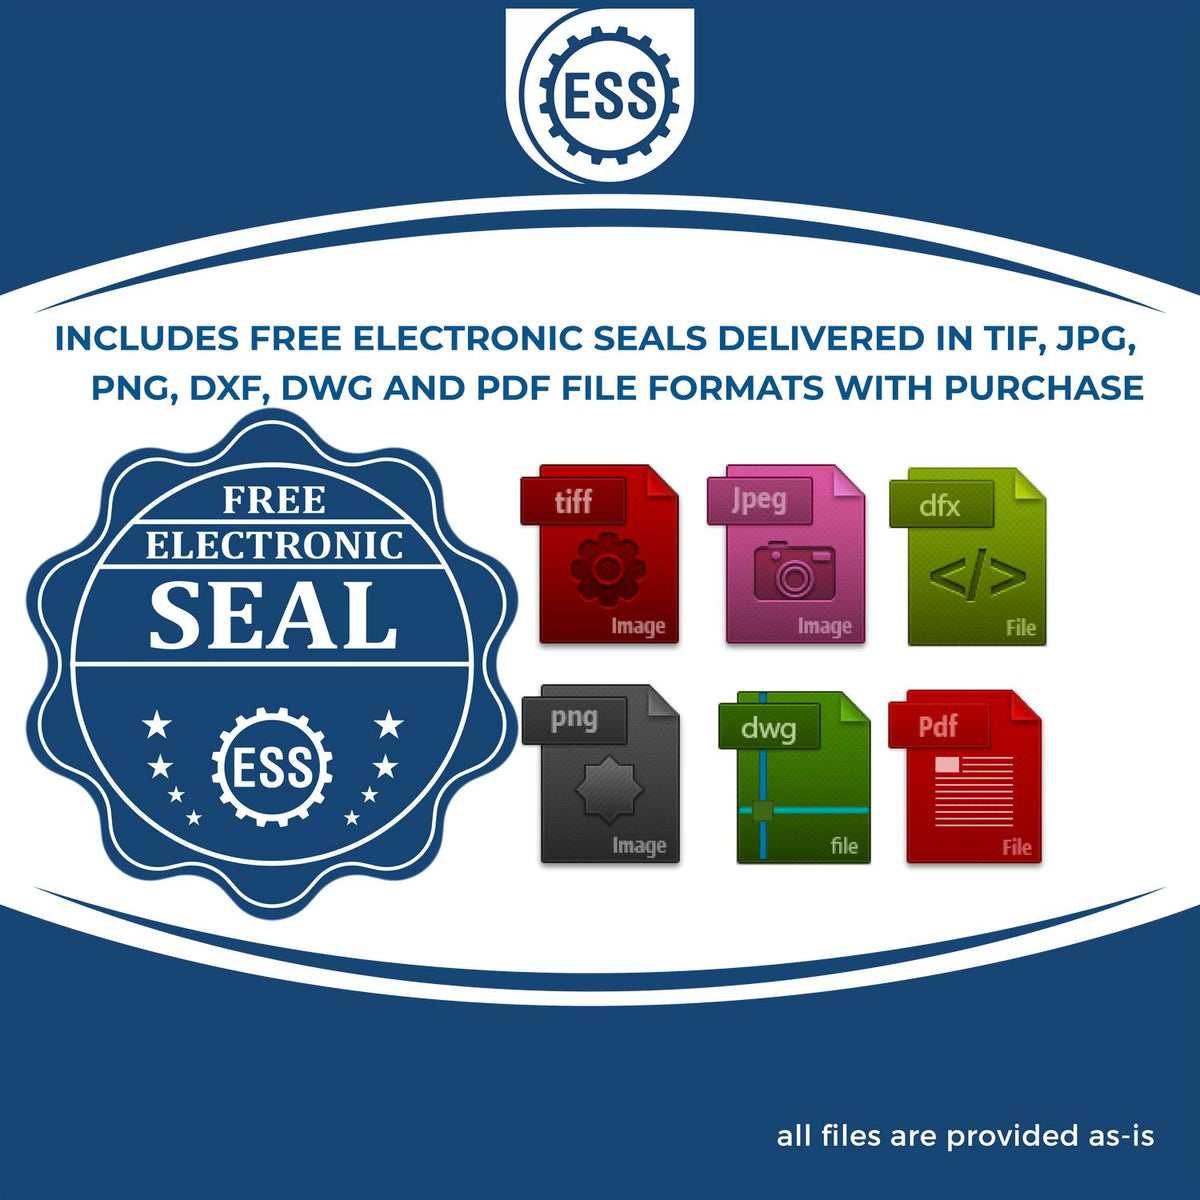 An infographic for the free electronic seal for the PSI California Notary Stamp illustrating the different file type icons such as DXF, DWG, TIF, JPG and PNG.